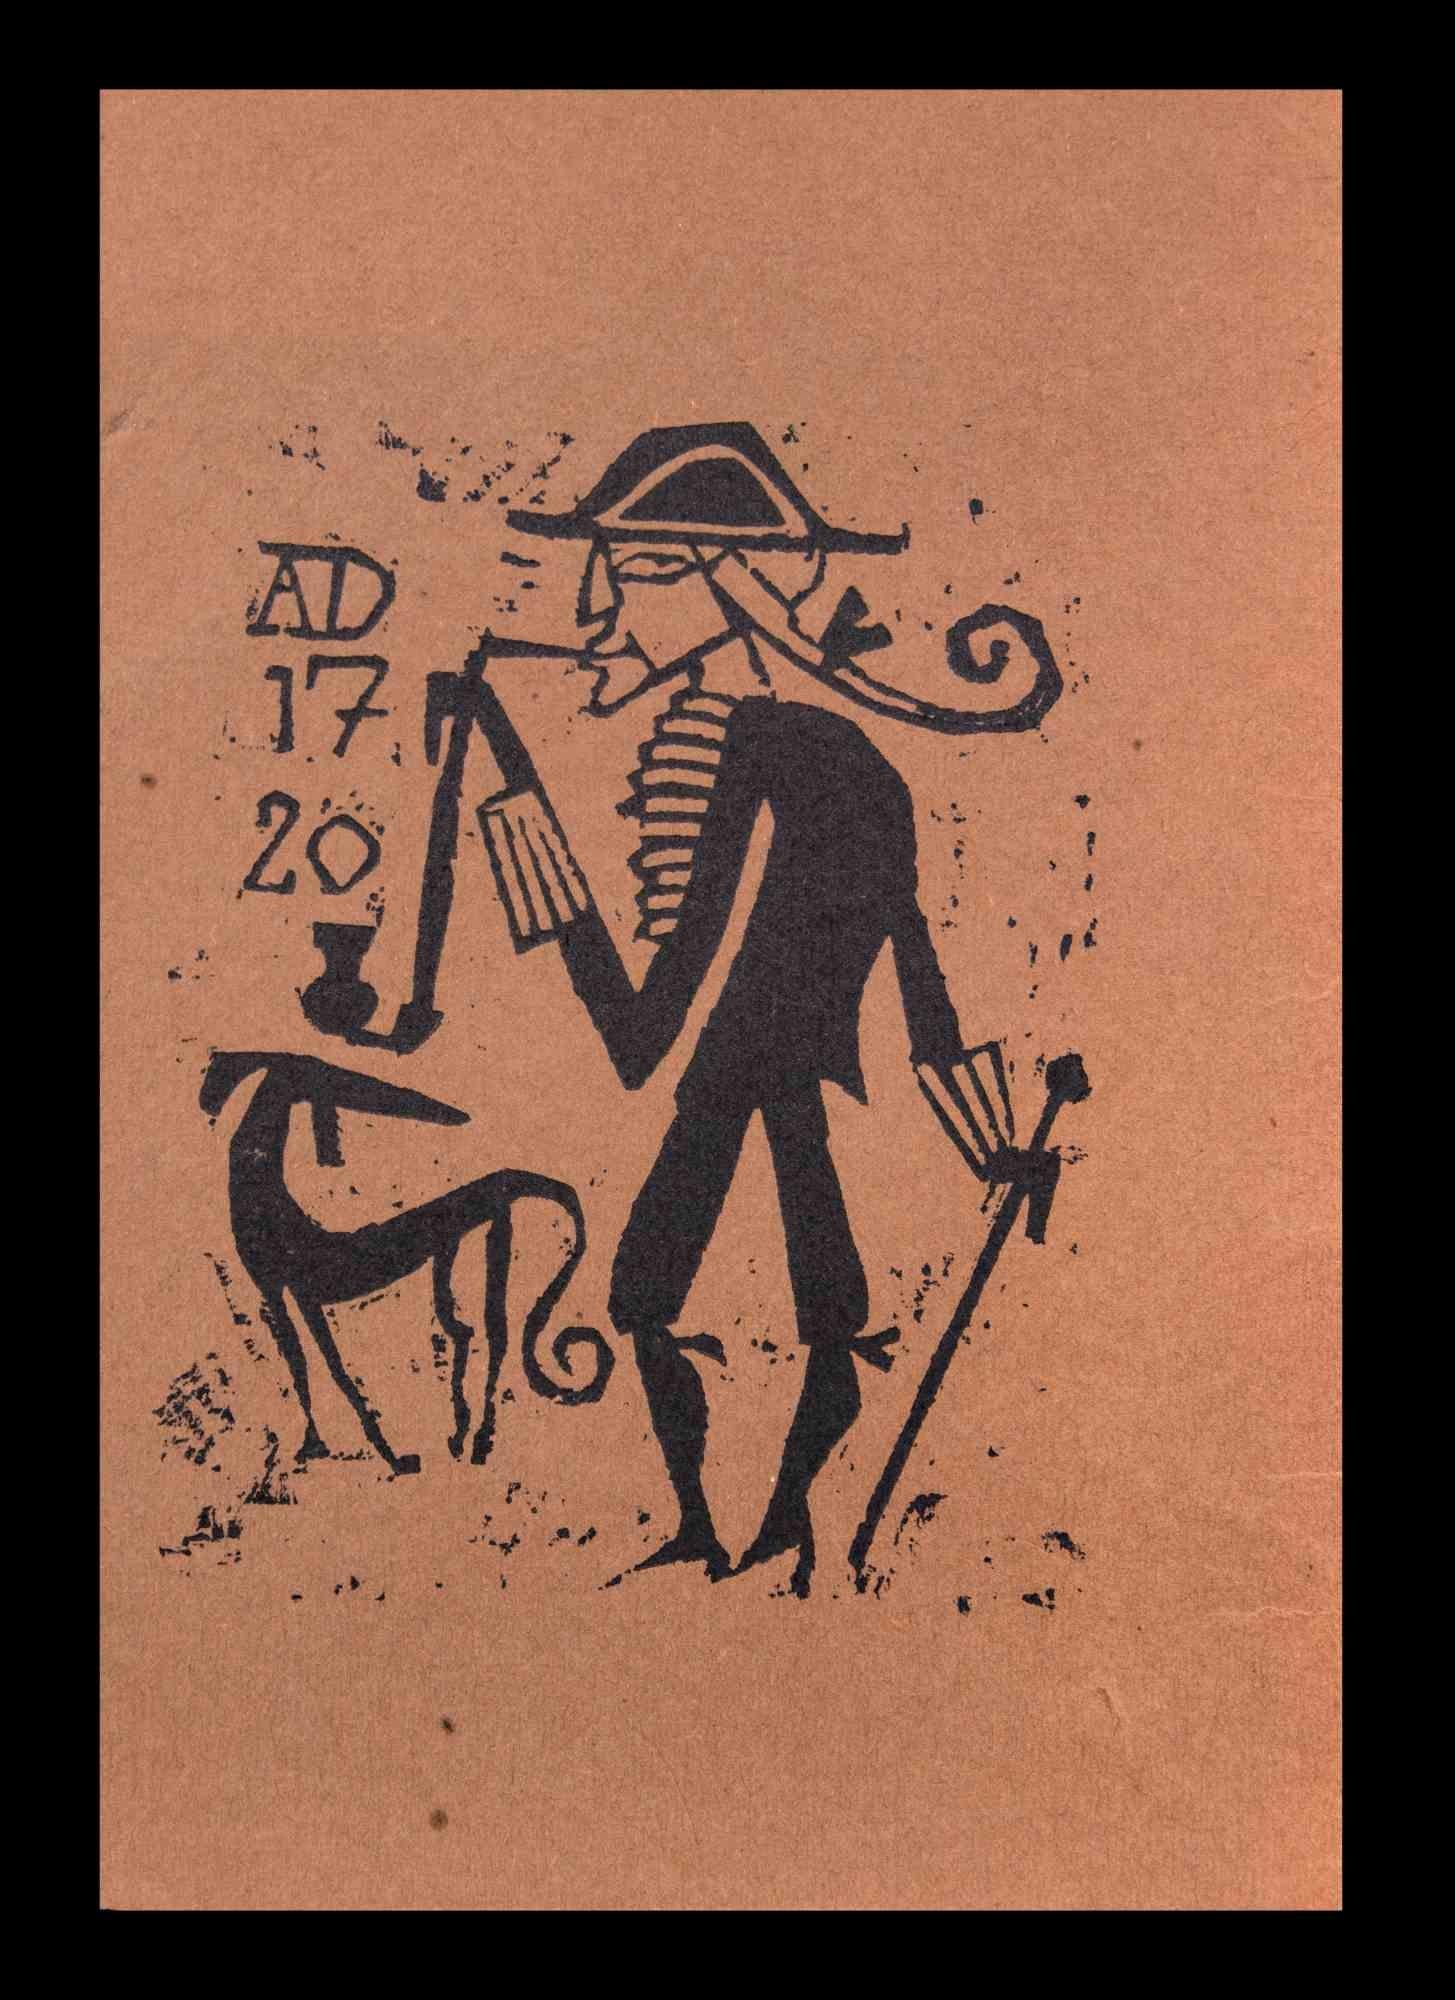 Smoking Man with Dog is a woodcut on brownish color paper print on paper realized by Charles Sterns in the early 20th century

Very Good conditions.

The artwork is represented by mastery through intense black color and deft strokes, full of emotion